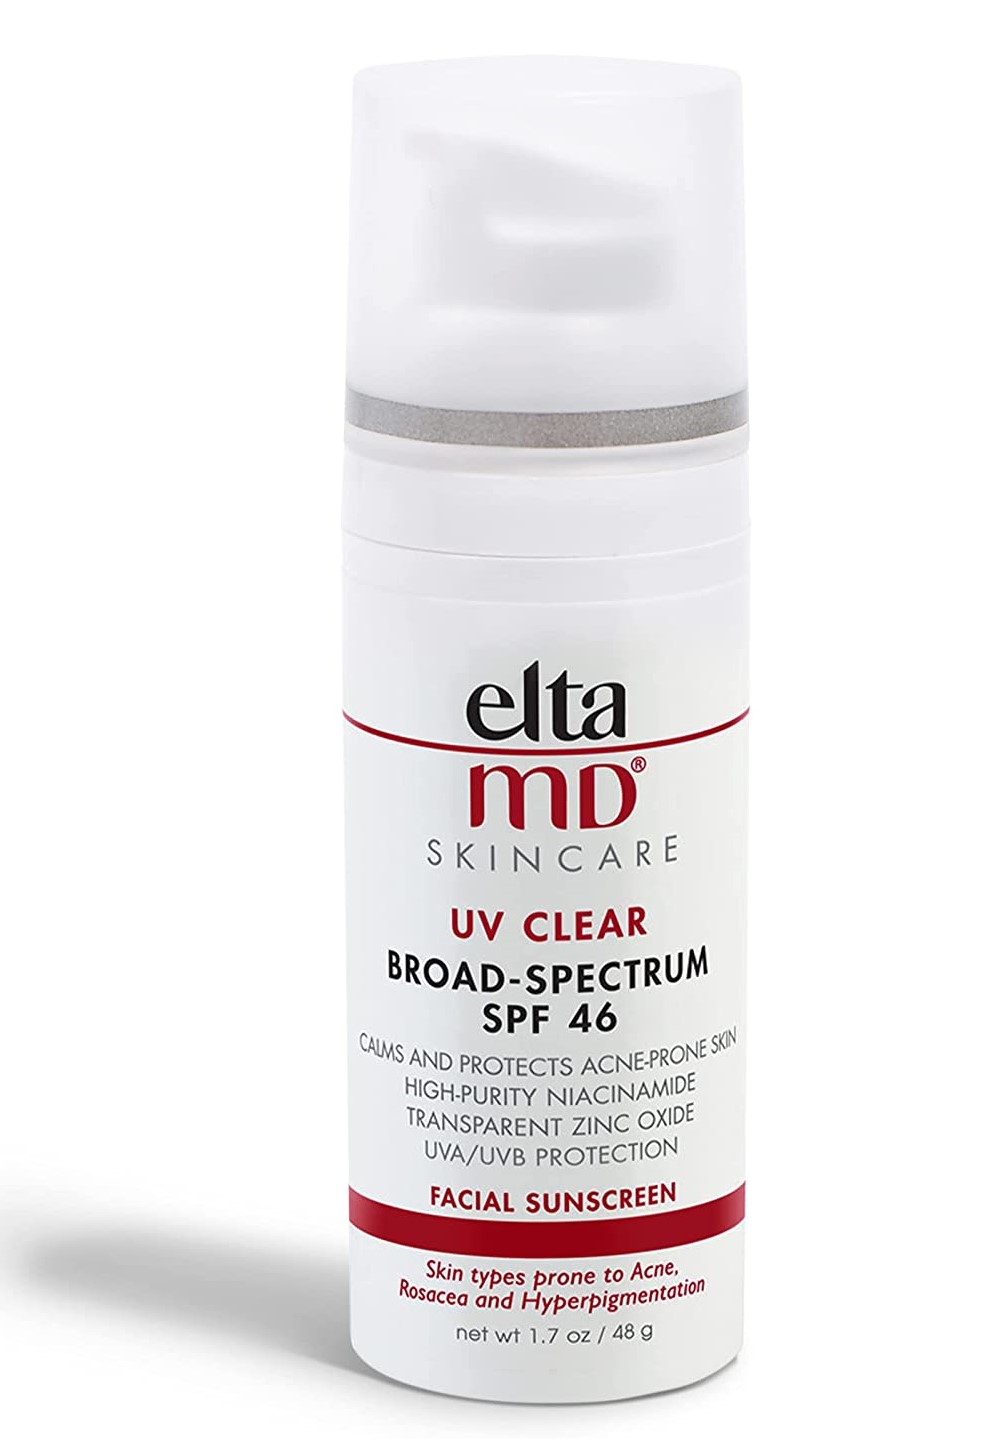 EltaMD UV Clear Facial Sunscreen Broad-Spectrum SPF 46 for Sensitive or Acne-Prone Skin, Oil-free, 